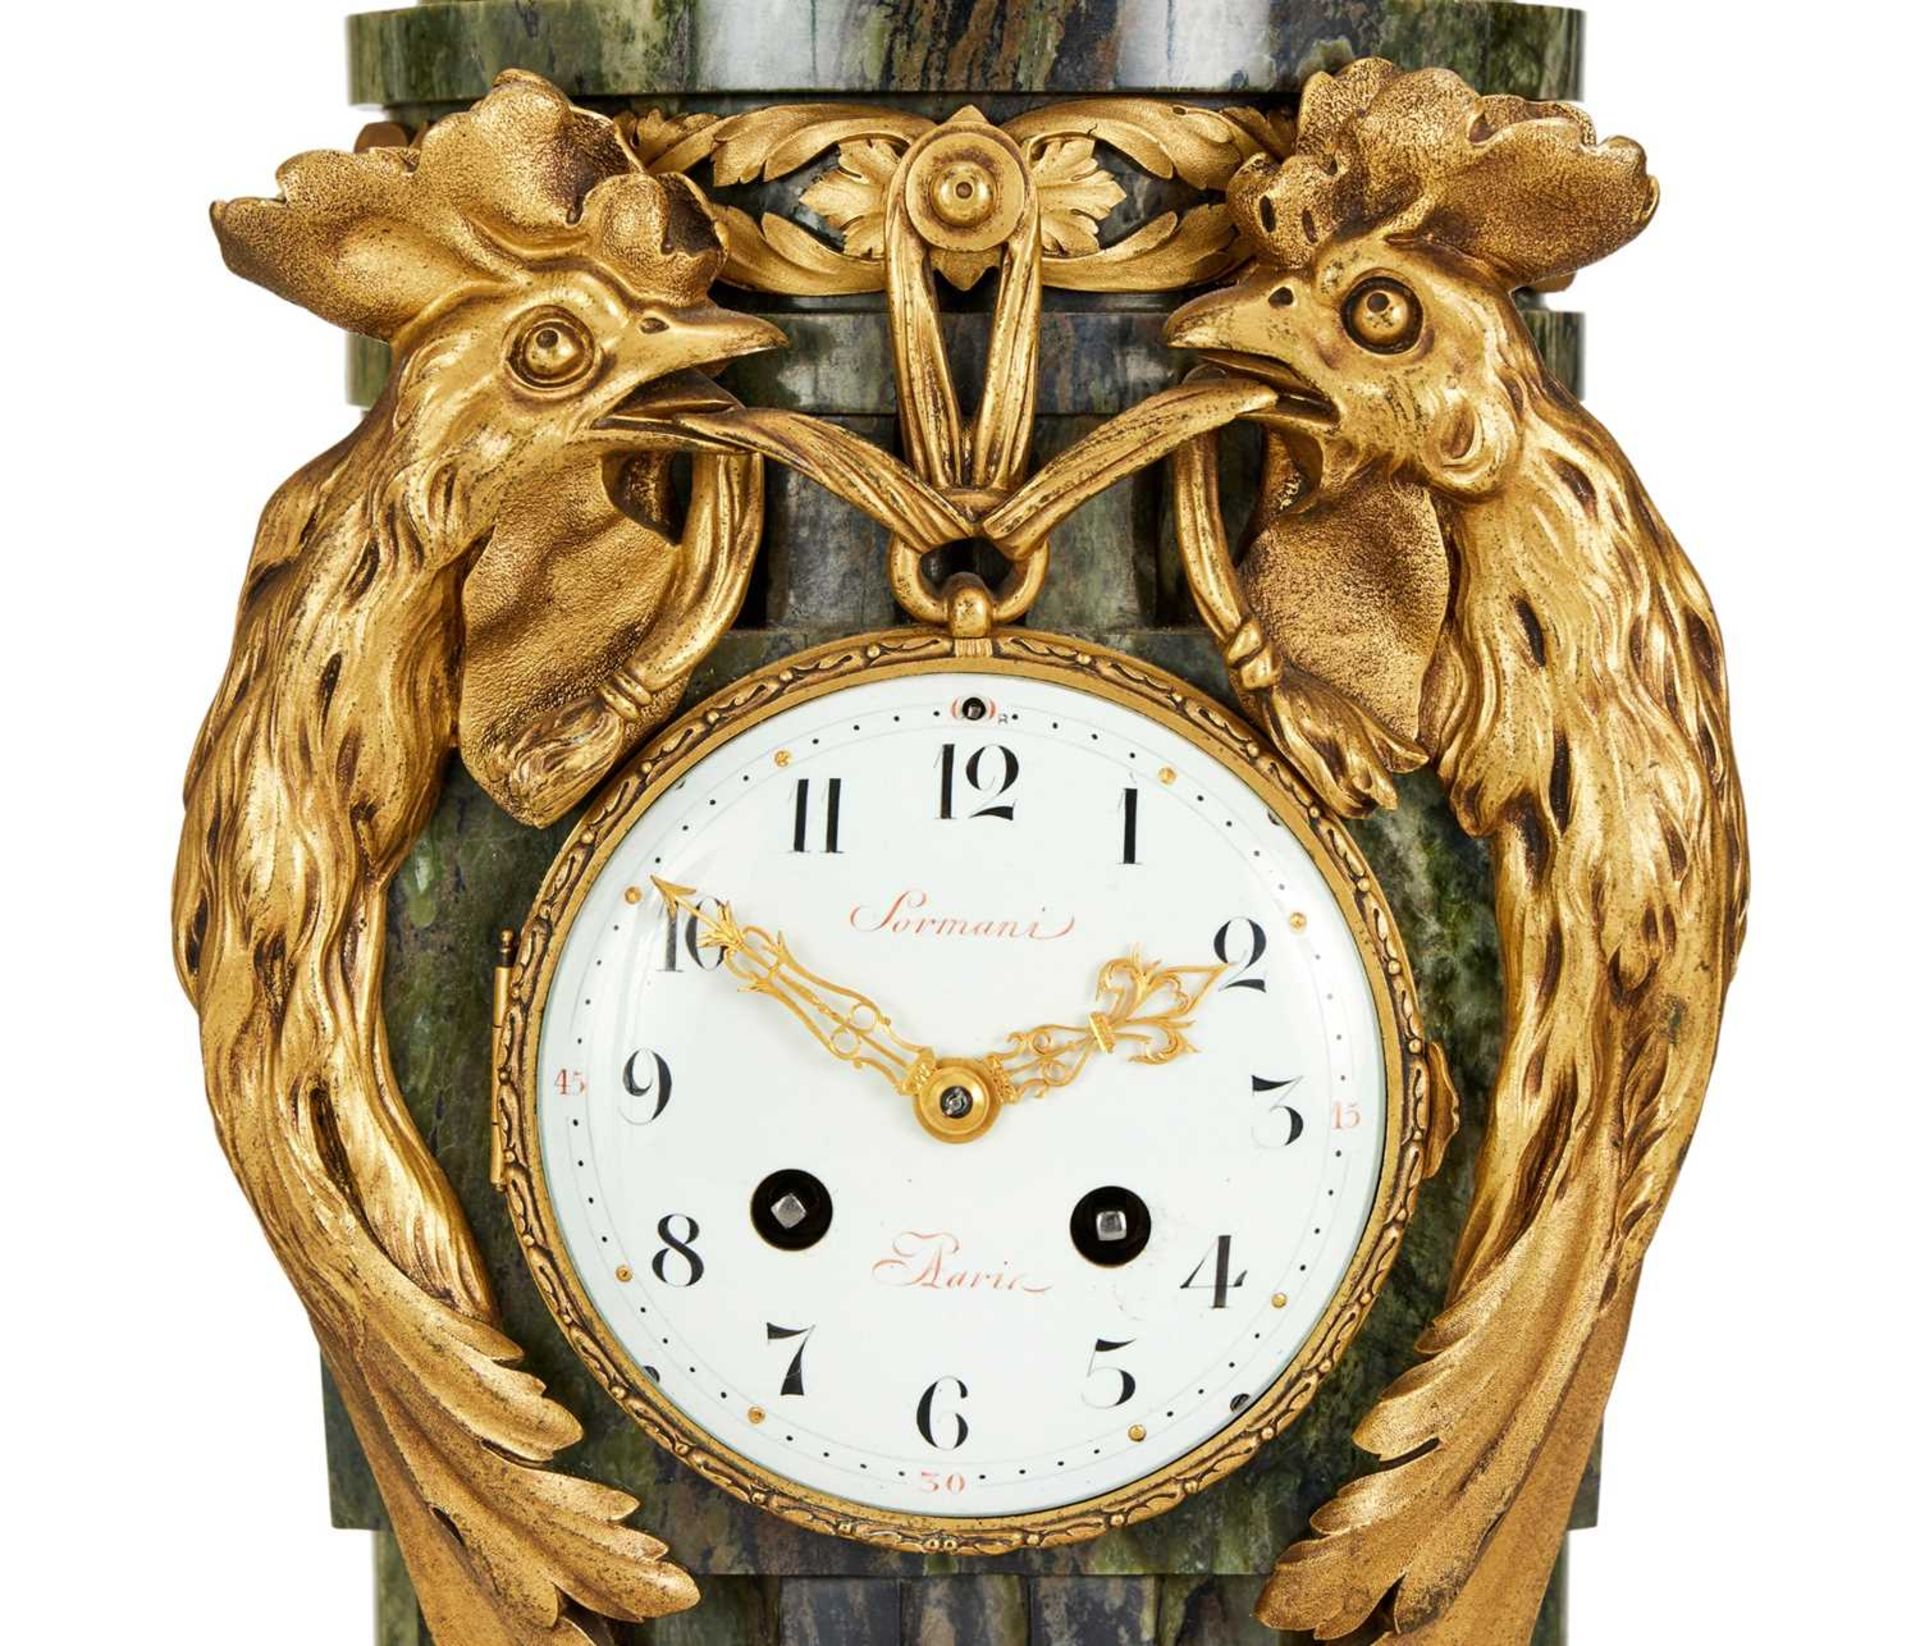 SORMANI, PARIS: AN IMPORTANT LATE 19TH CENTURY ORMOLU AND MARBLE MANTEL CLOCK - Image 3 of 5